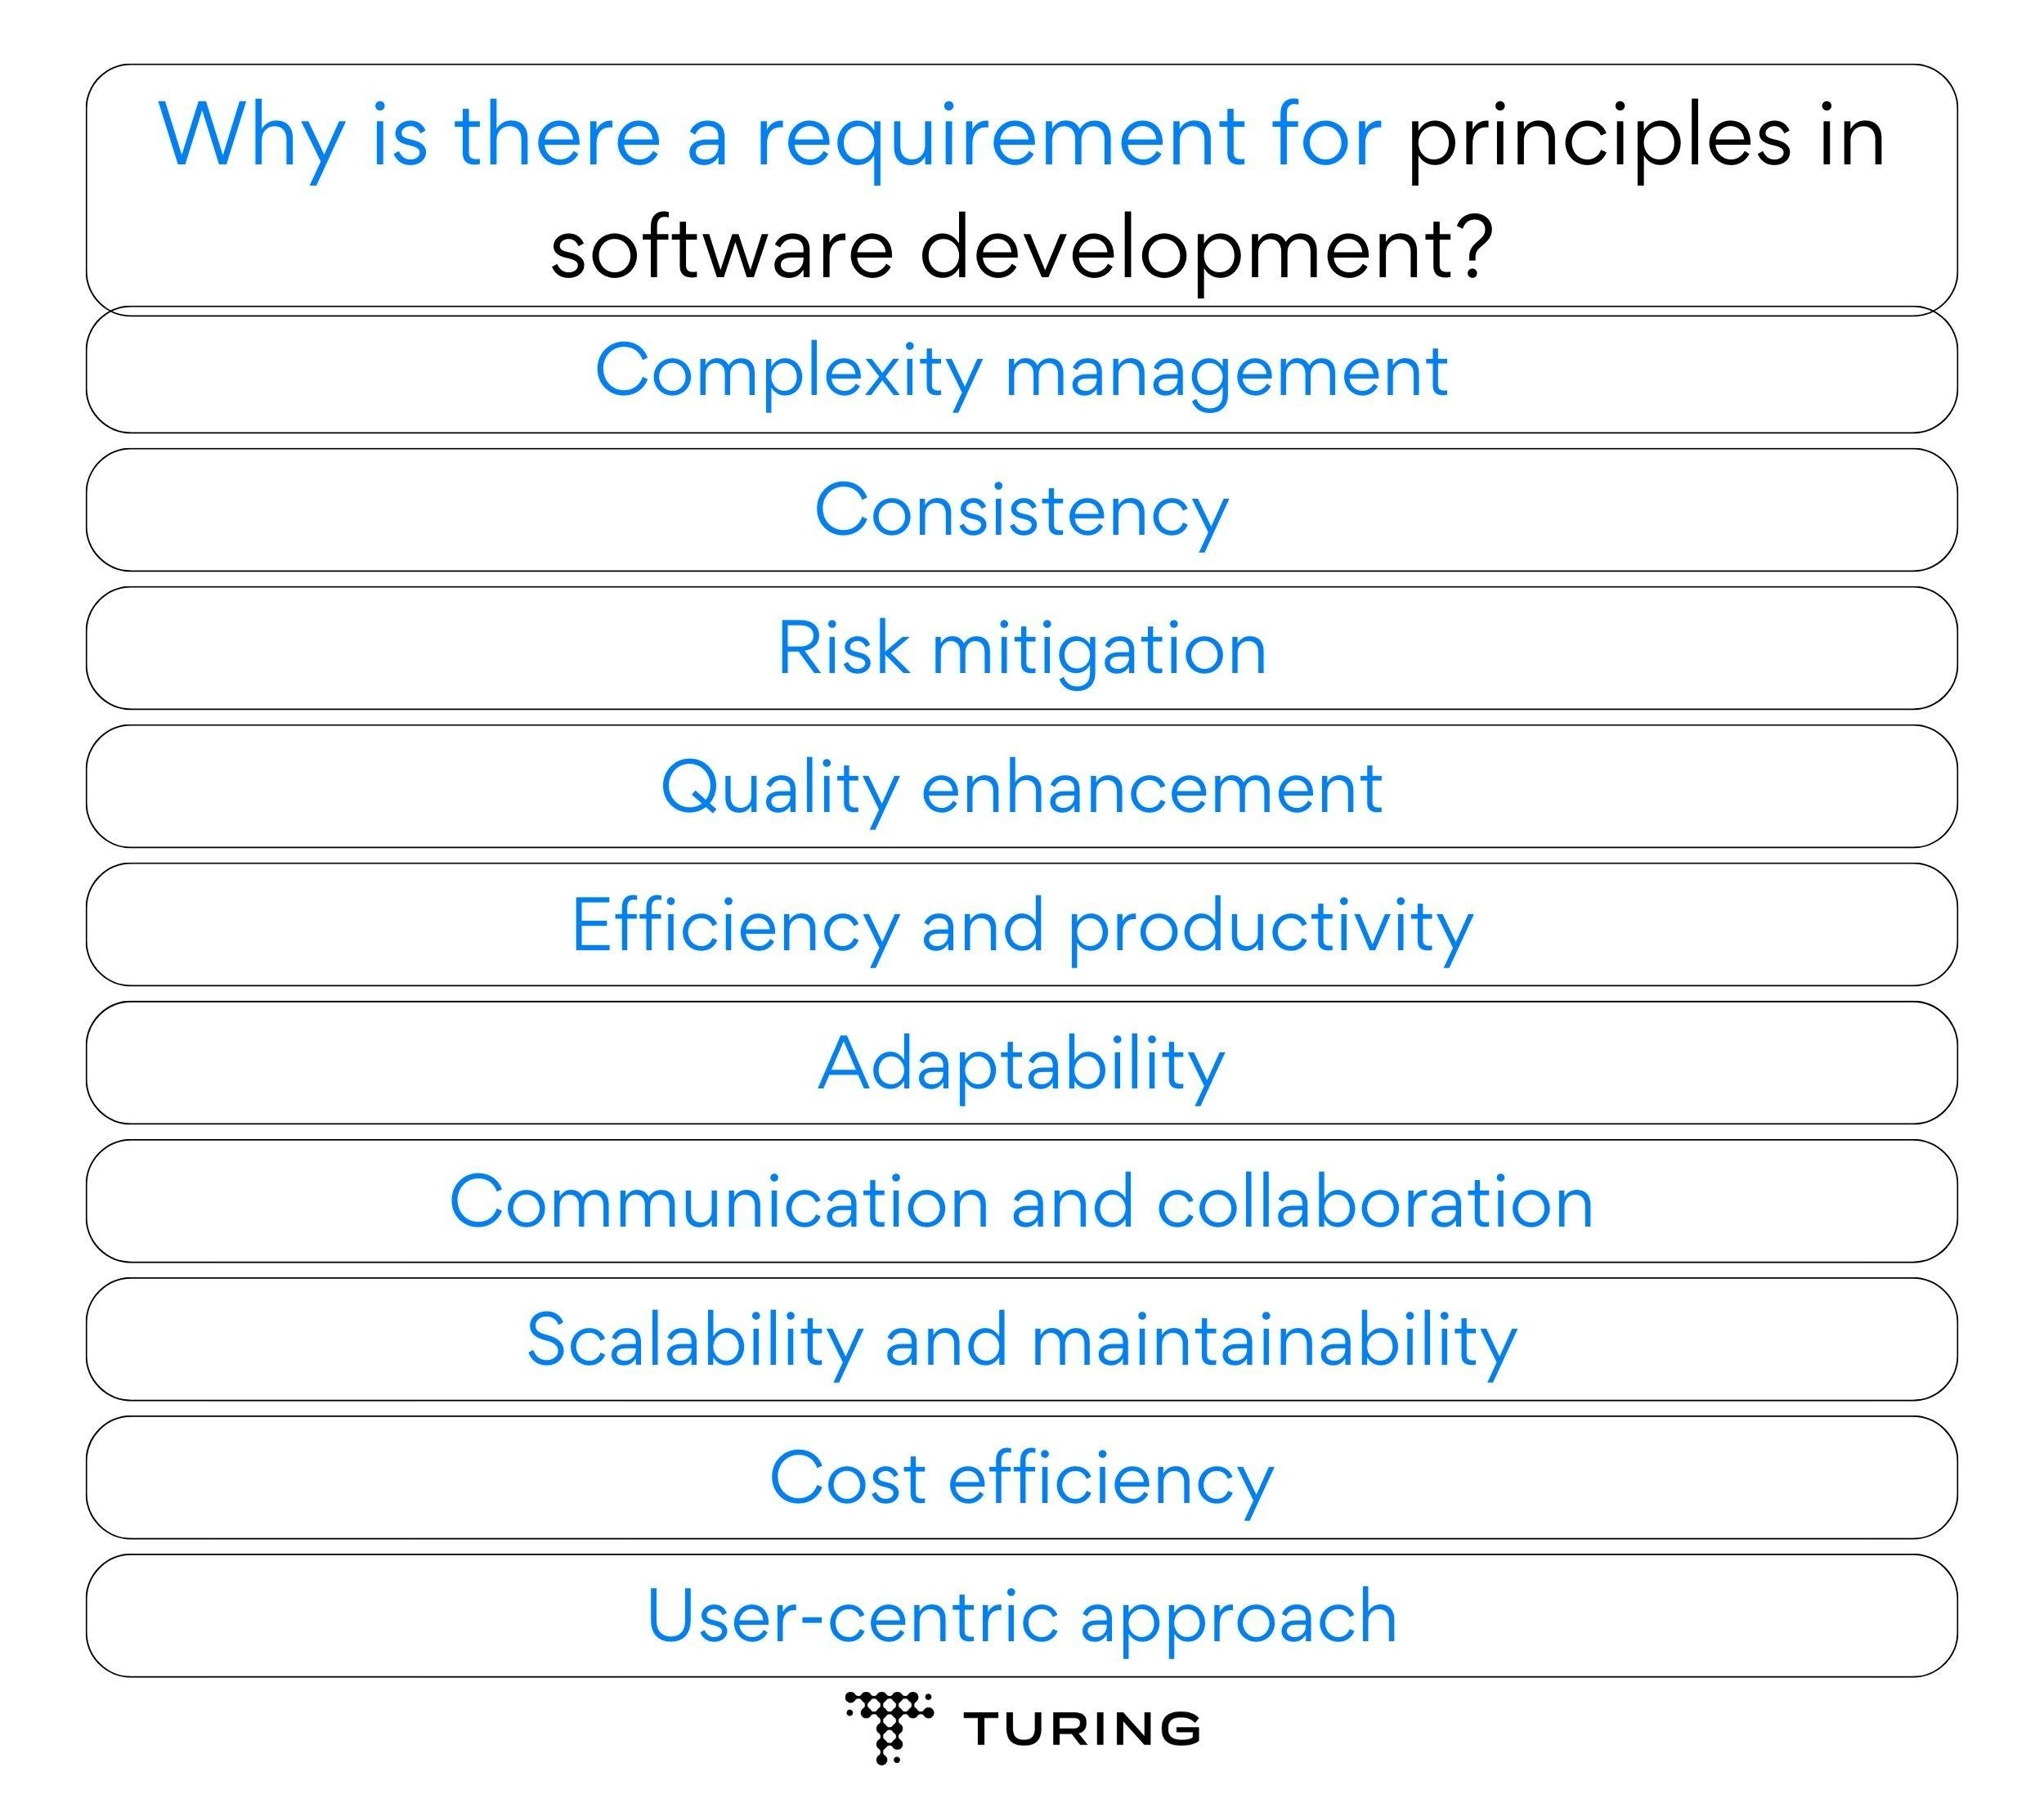 Why is there a requirement for principles in software development?